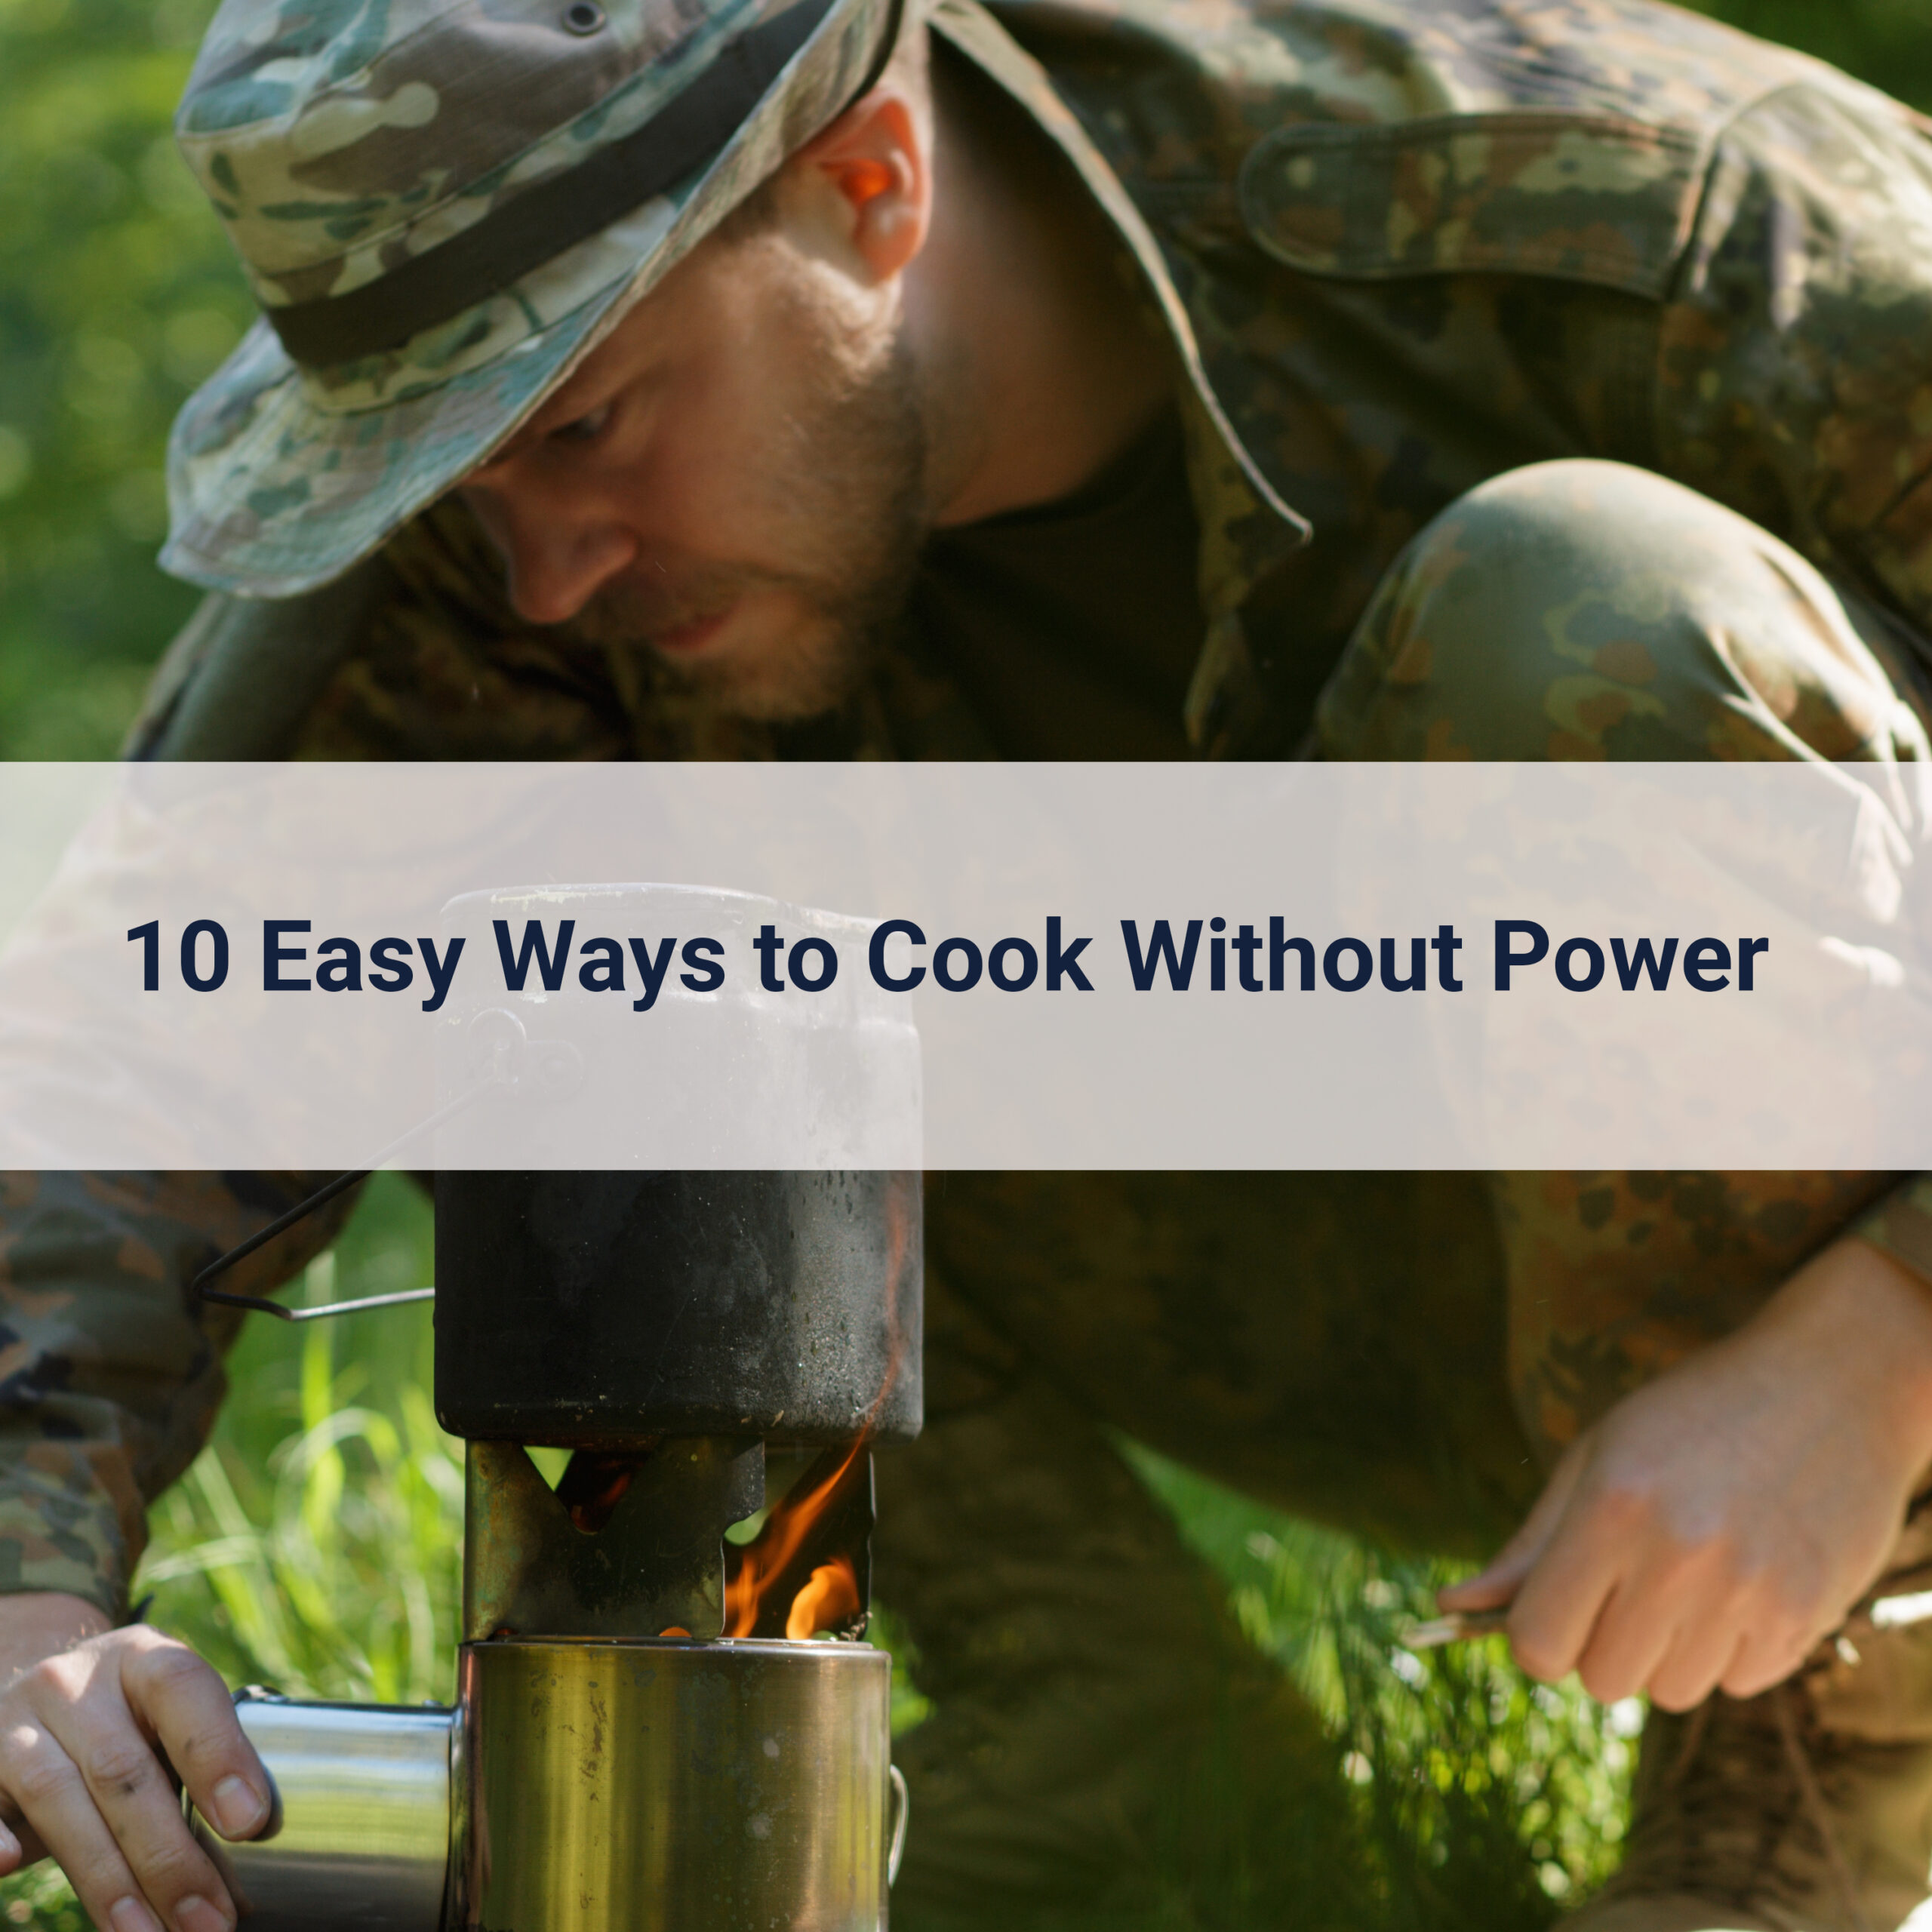 Man outside in camo leaning over portable gas stove